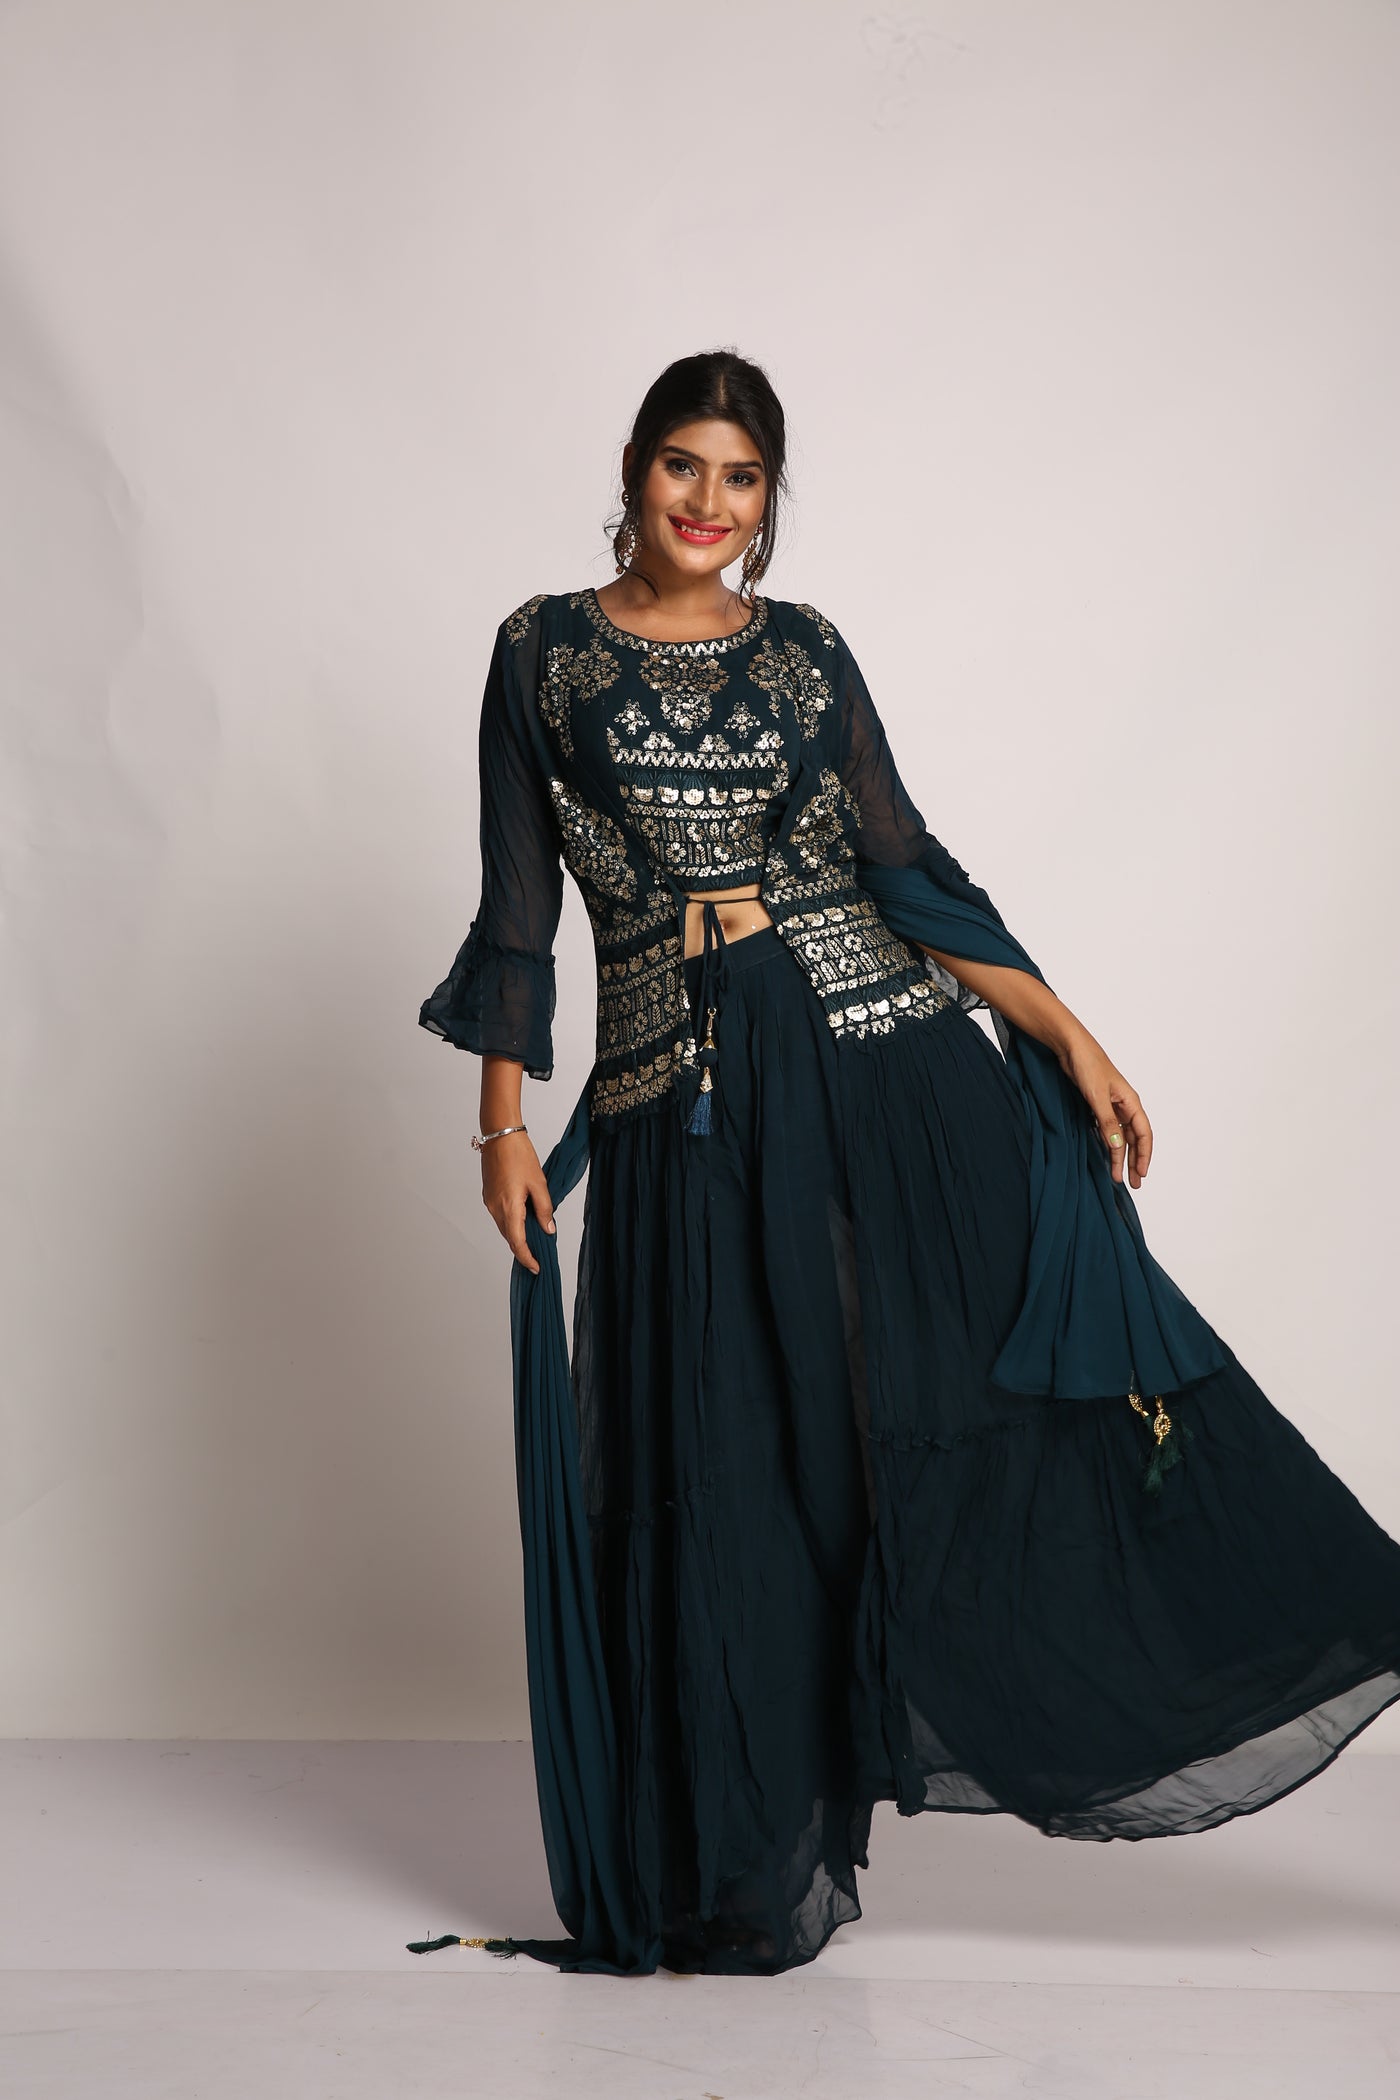 Forrest Green Palazzo Set - Indian Clothing in Denver, CO, Aurora, CO, Boulder, CO, Fort Collins, CO, Colorado Springs, CO, Parker, CO, Highlands Ranch, CO, Cherry Creek, CO, Centennial, CO, and Longmont, CO. Nationwide shipping USA - India Fashion X